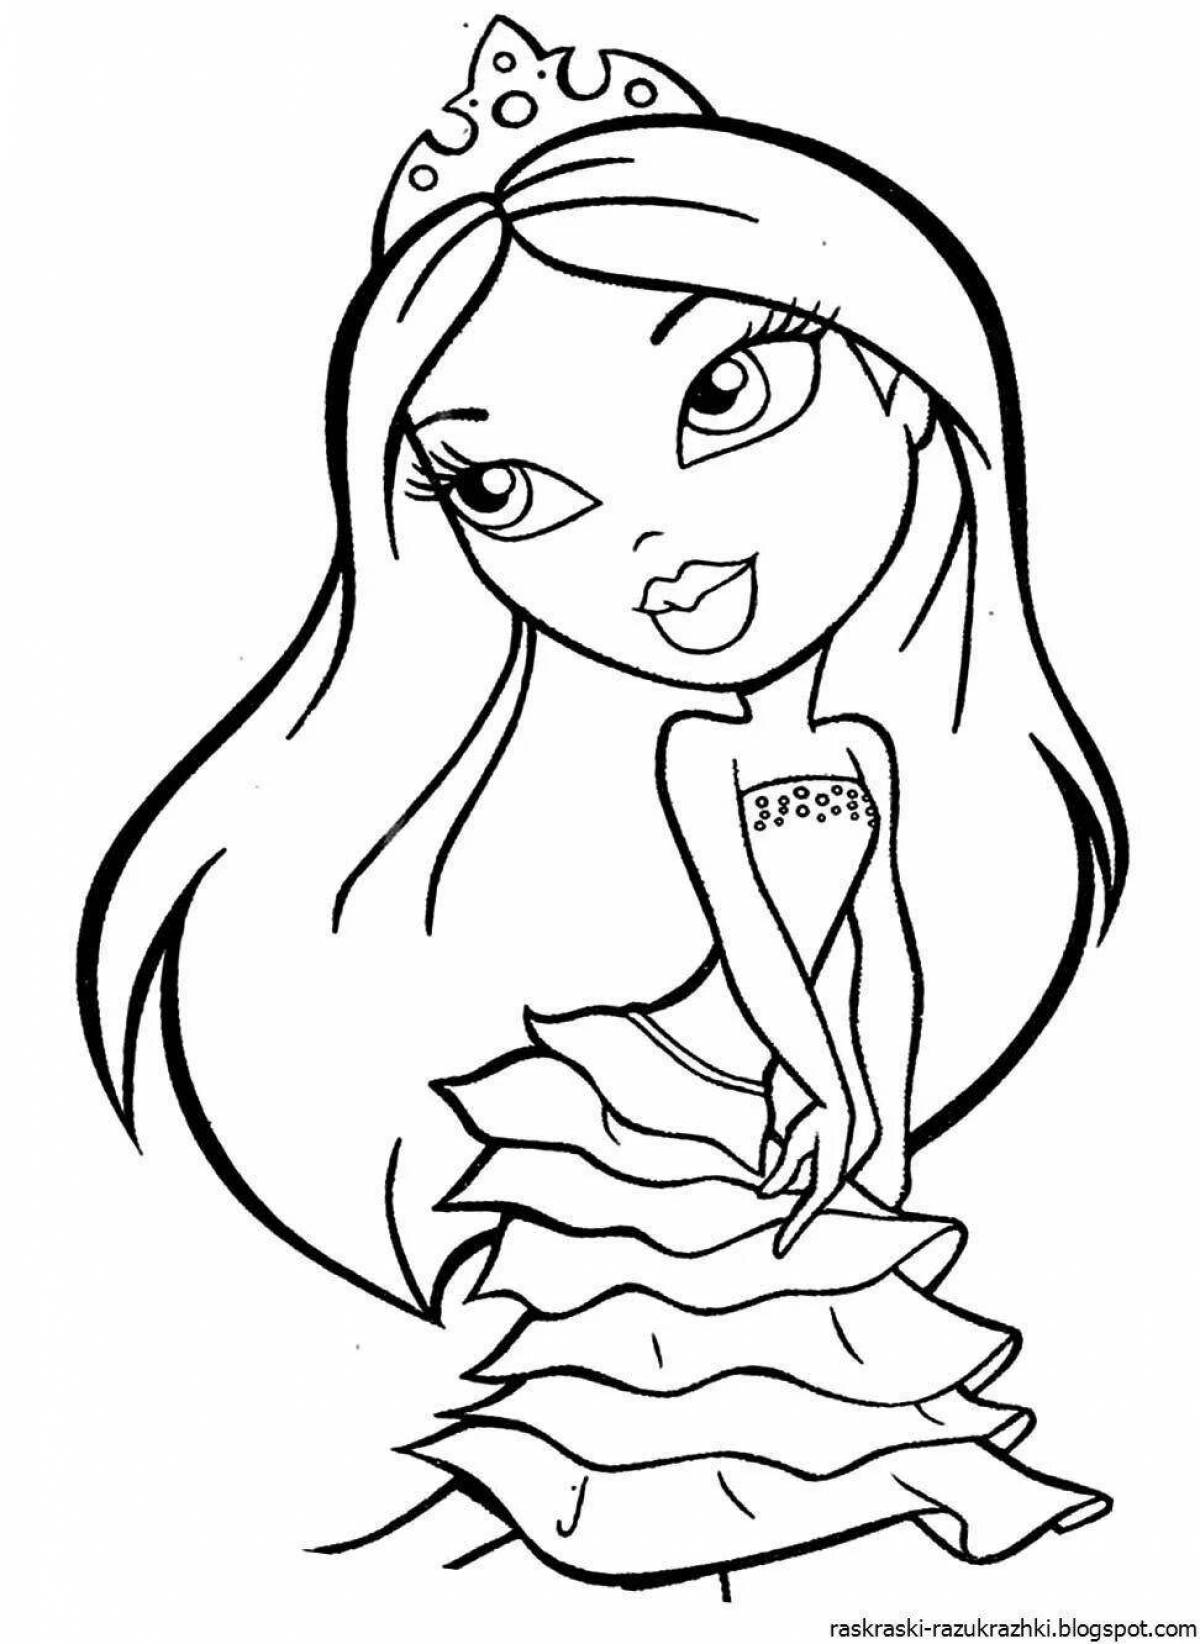 Radiant coloring page find for girls